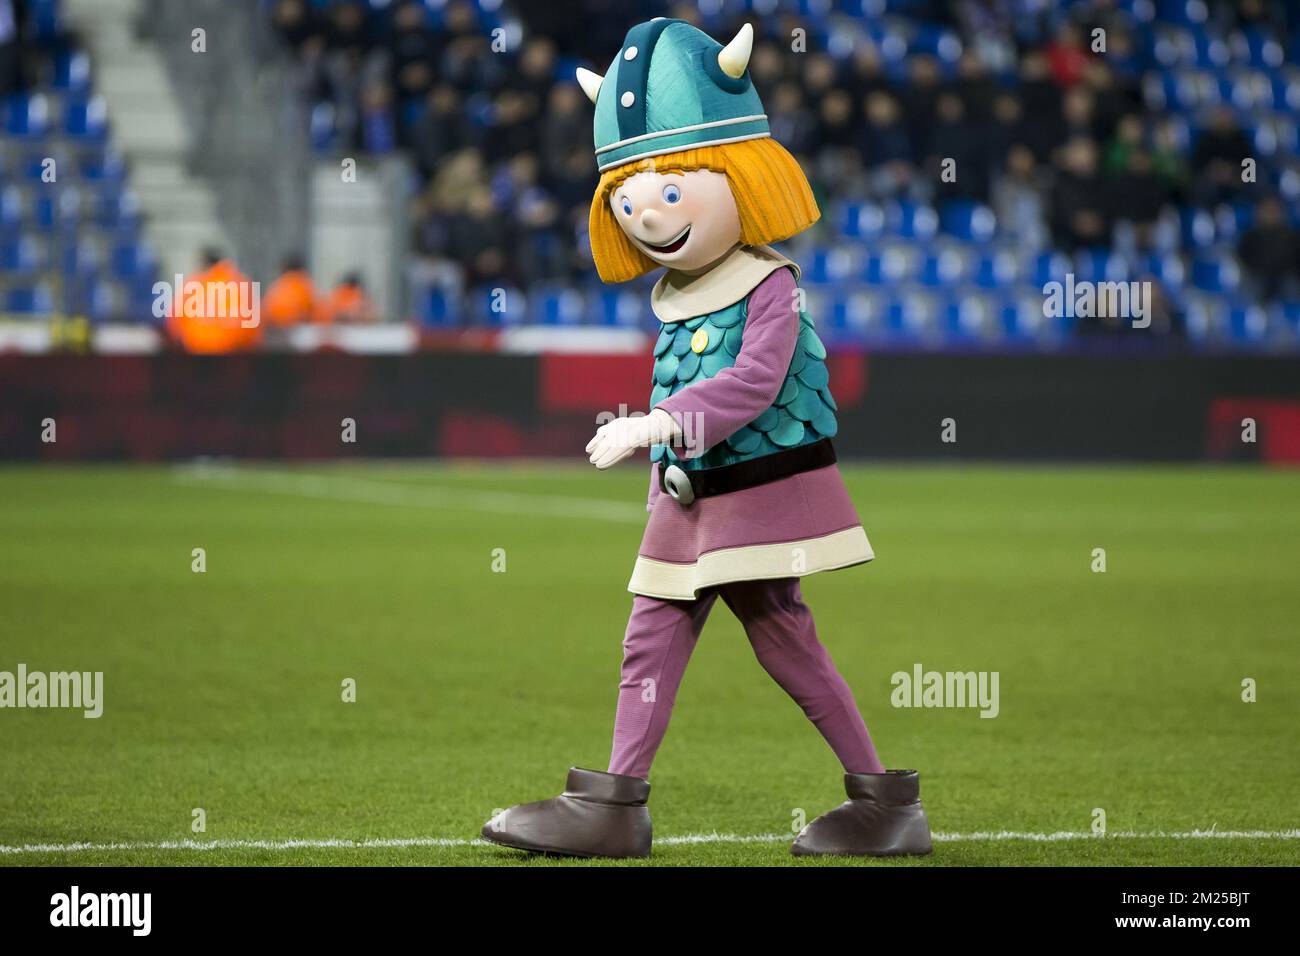 Vicky the Viking (Wickie de Viking - Vic le Viking) pictured before the Jupiler Pro League match between KRC Genk and Sporting Charleroi, in Genk, Sunday 19 February 2017, on day 27 of the Belgian soccer championship. BELGA PHOTO KRISTOF VAN ACCOM Stock Photo